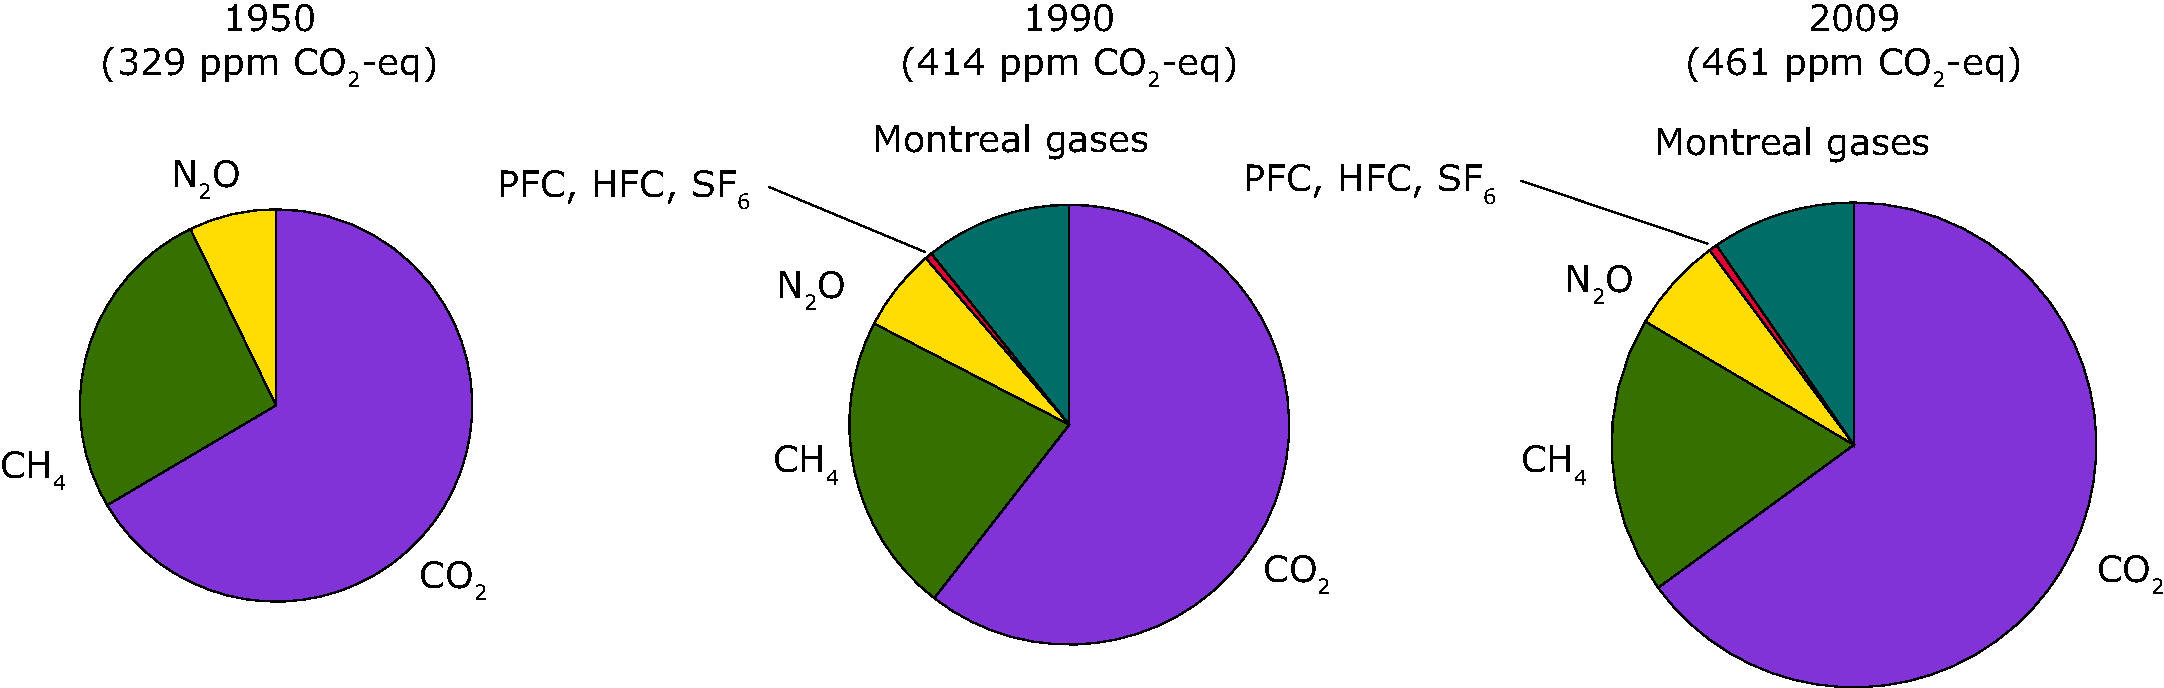 Contribution of the different GHGs as included in the Kyoto and Montreal protocol to the overall greenhouse gas concentration in 1950, 1990 and 2009 